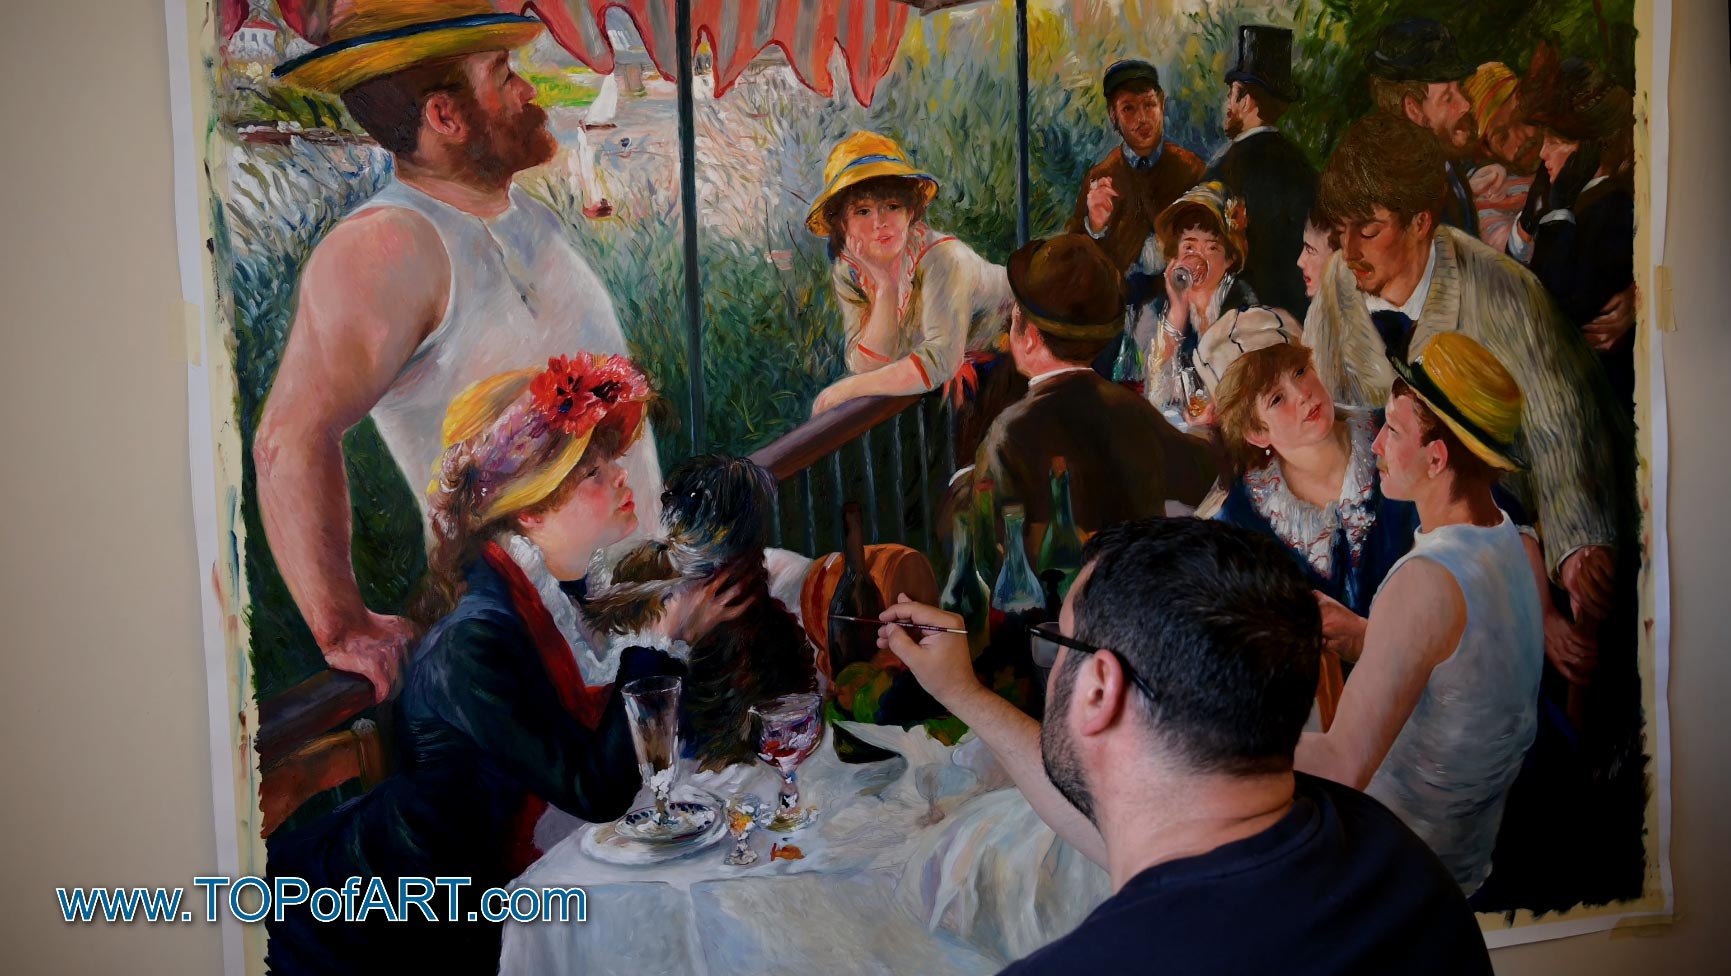 Pierre-Auguste Renoir - "Luncheon of the Boating Party" - Process of Creation of the Painting